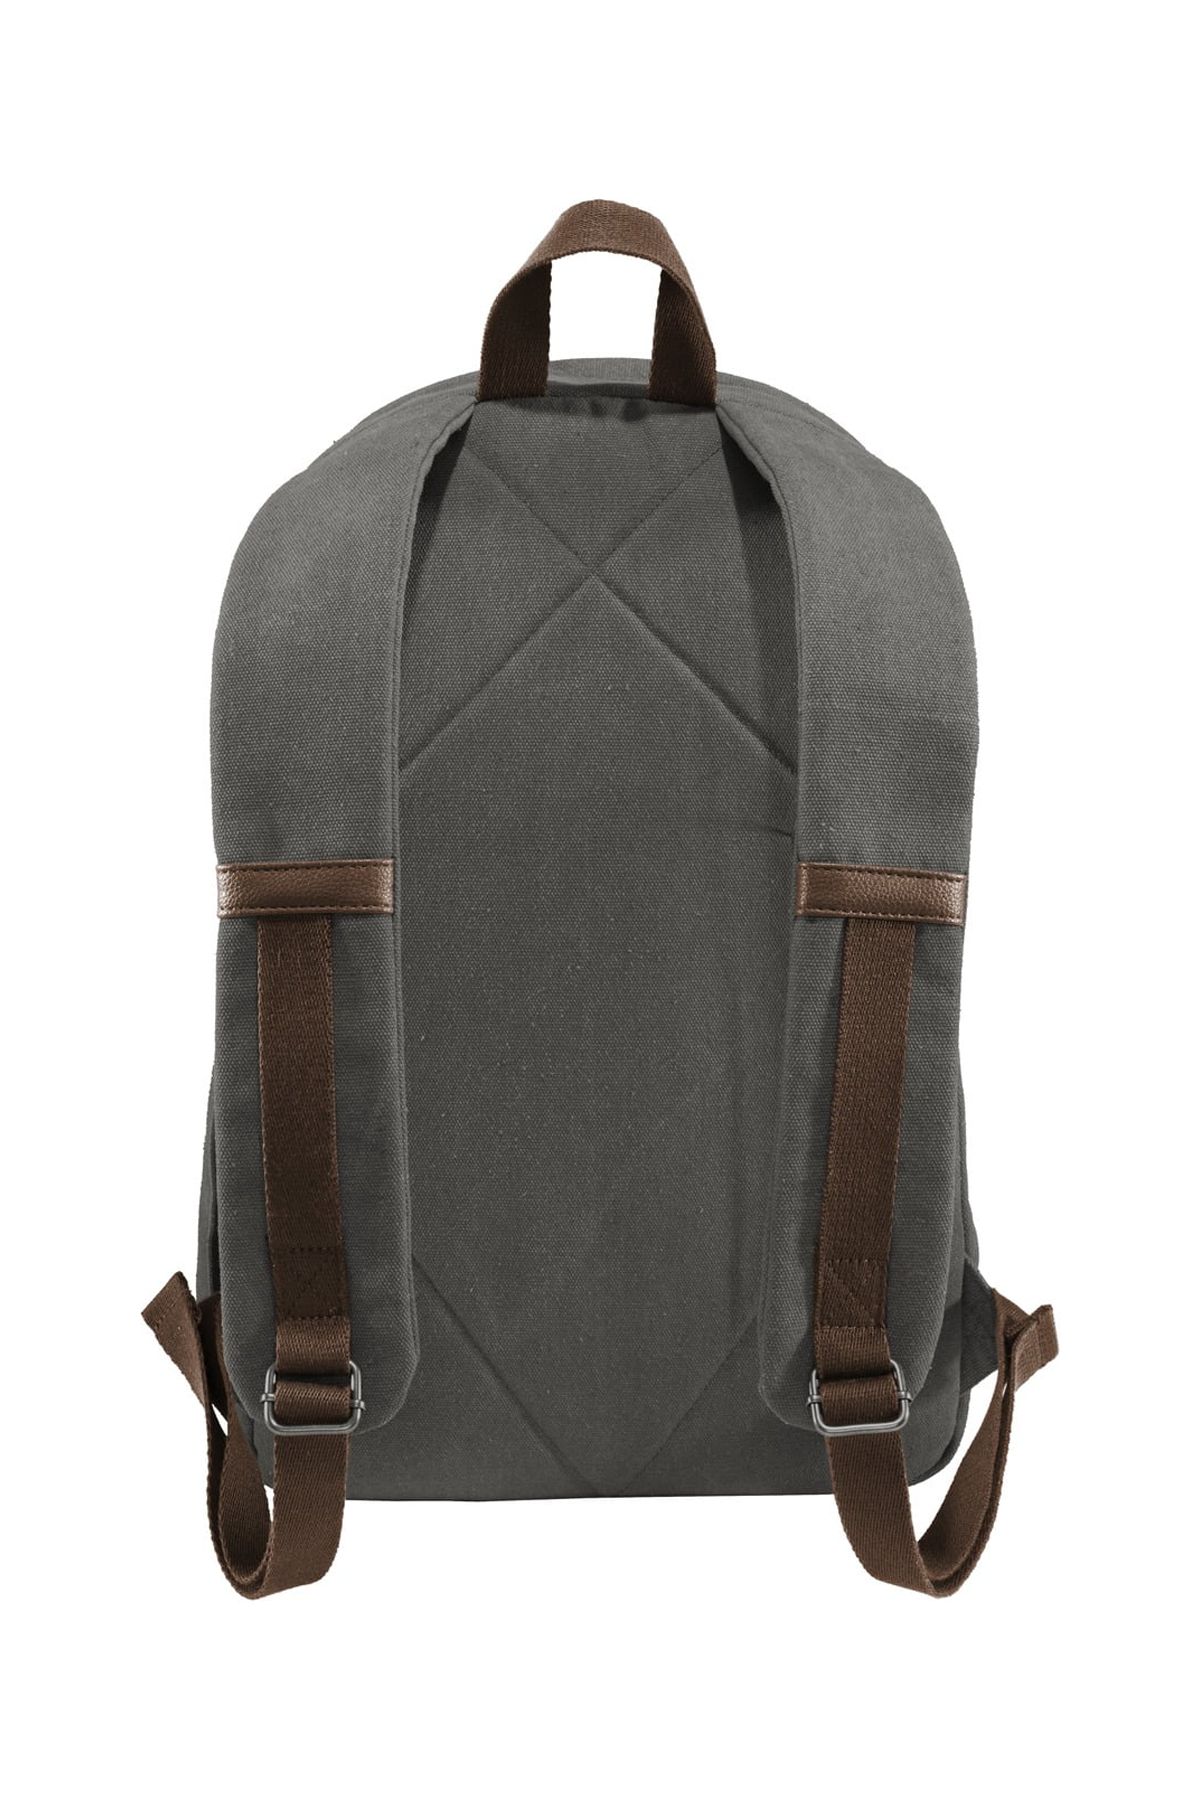 Port Authority Bg210 Cotton Canvas Backpack - image 3 of 3